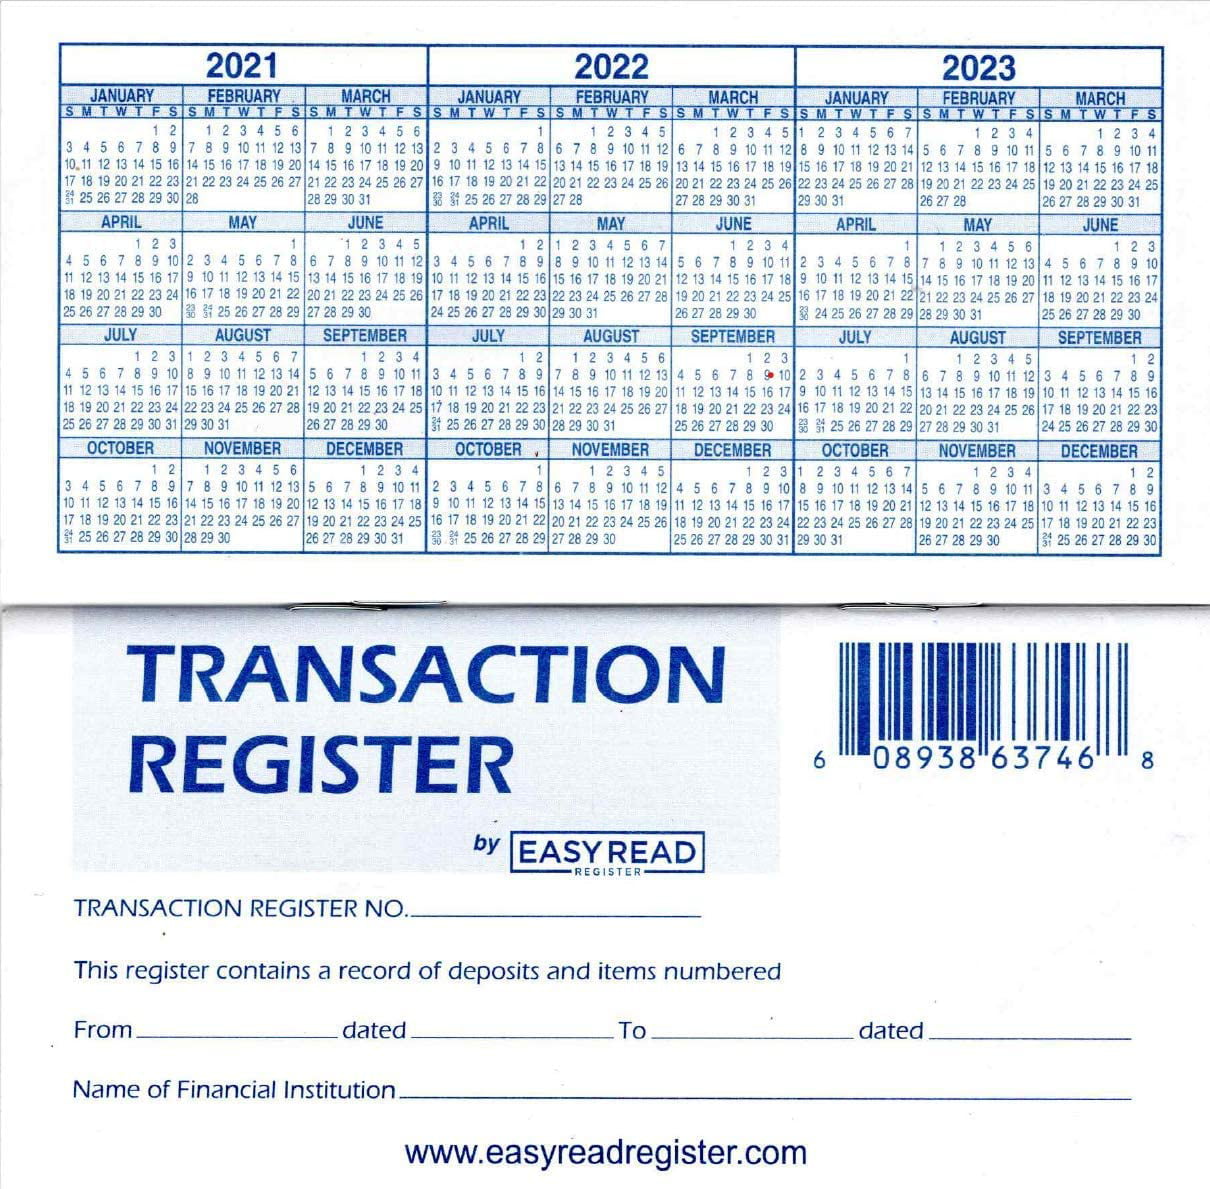 Transactions Ledgers Pack of 10 Checkbook Registers for Personal Checkbook 